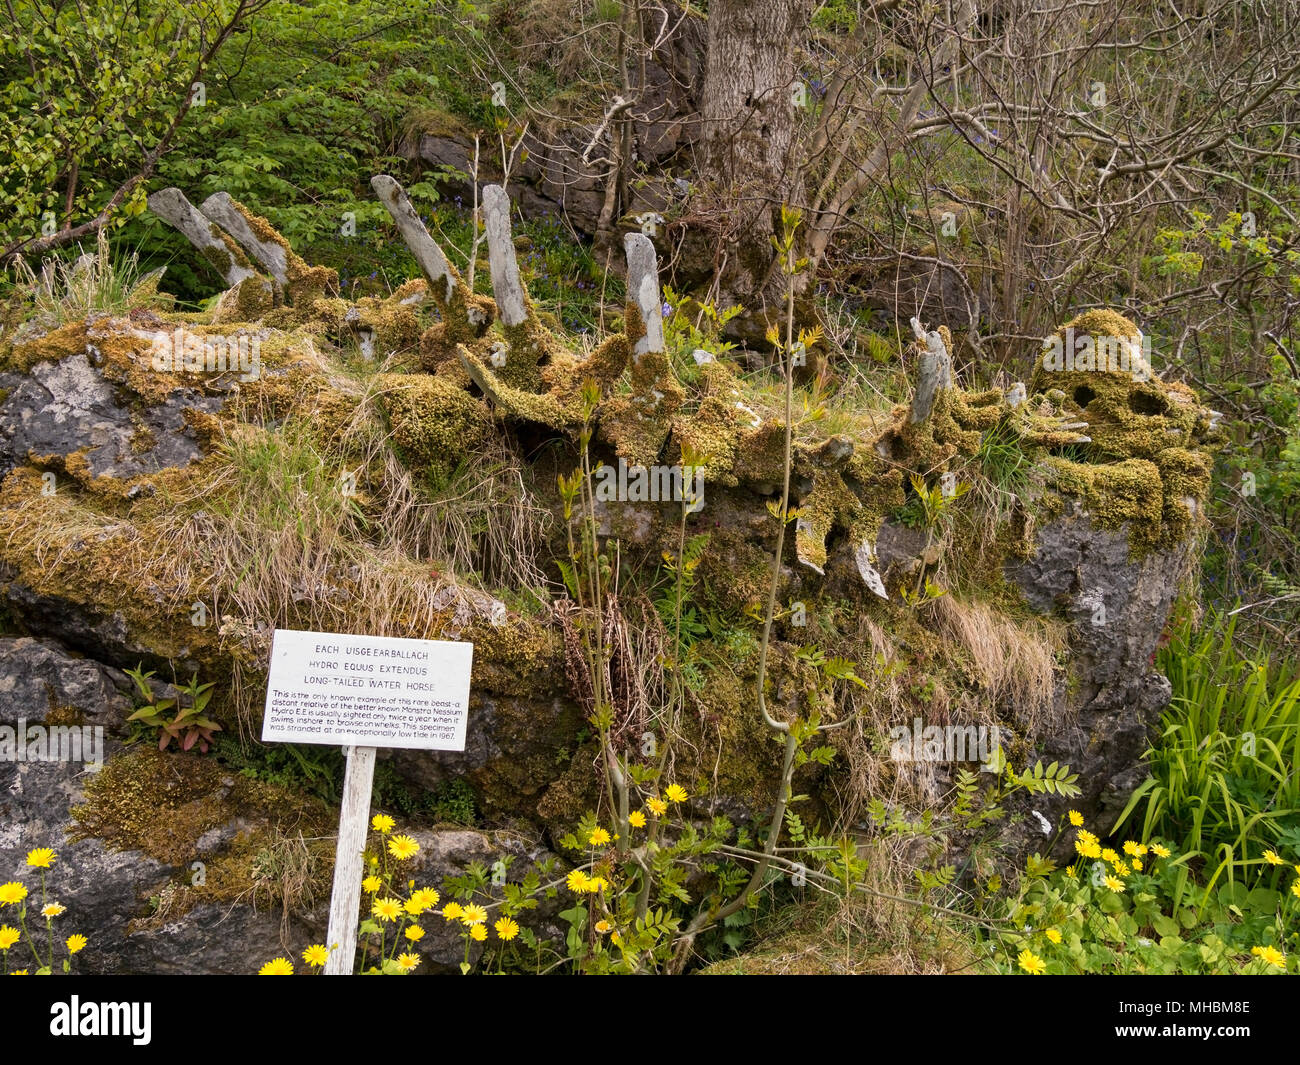 Spoof long-tailed water horse skeleton (actually a whale skeleton) on show in Ord on the Isle of Skye, Scotland, UK (See also image MHBM9E). Stock Photo